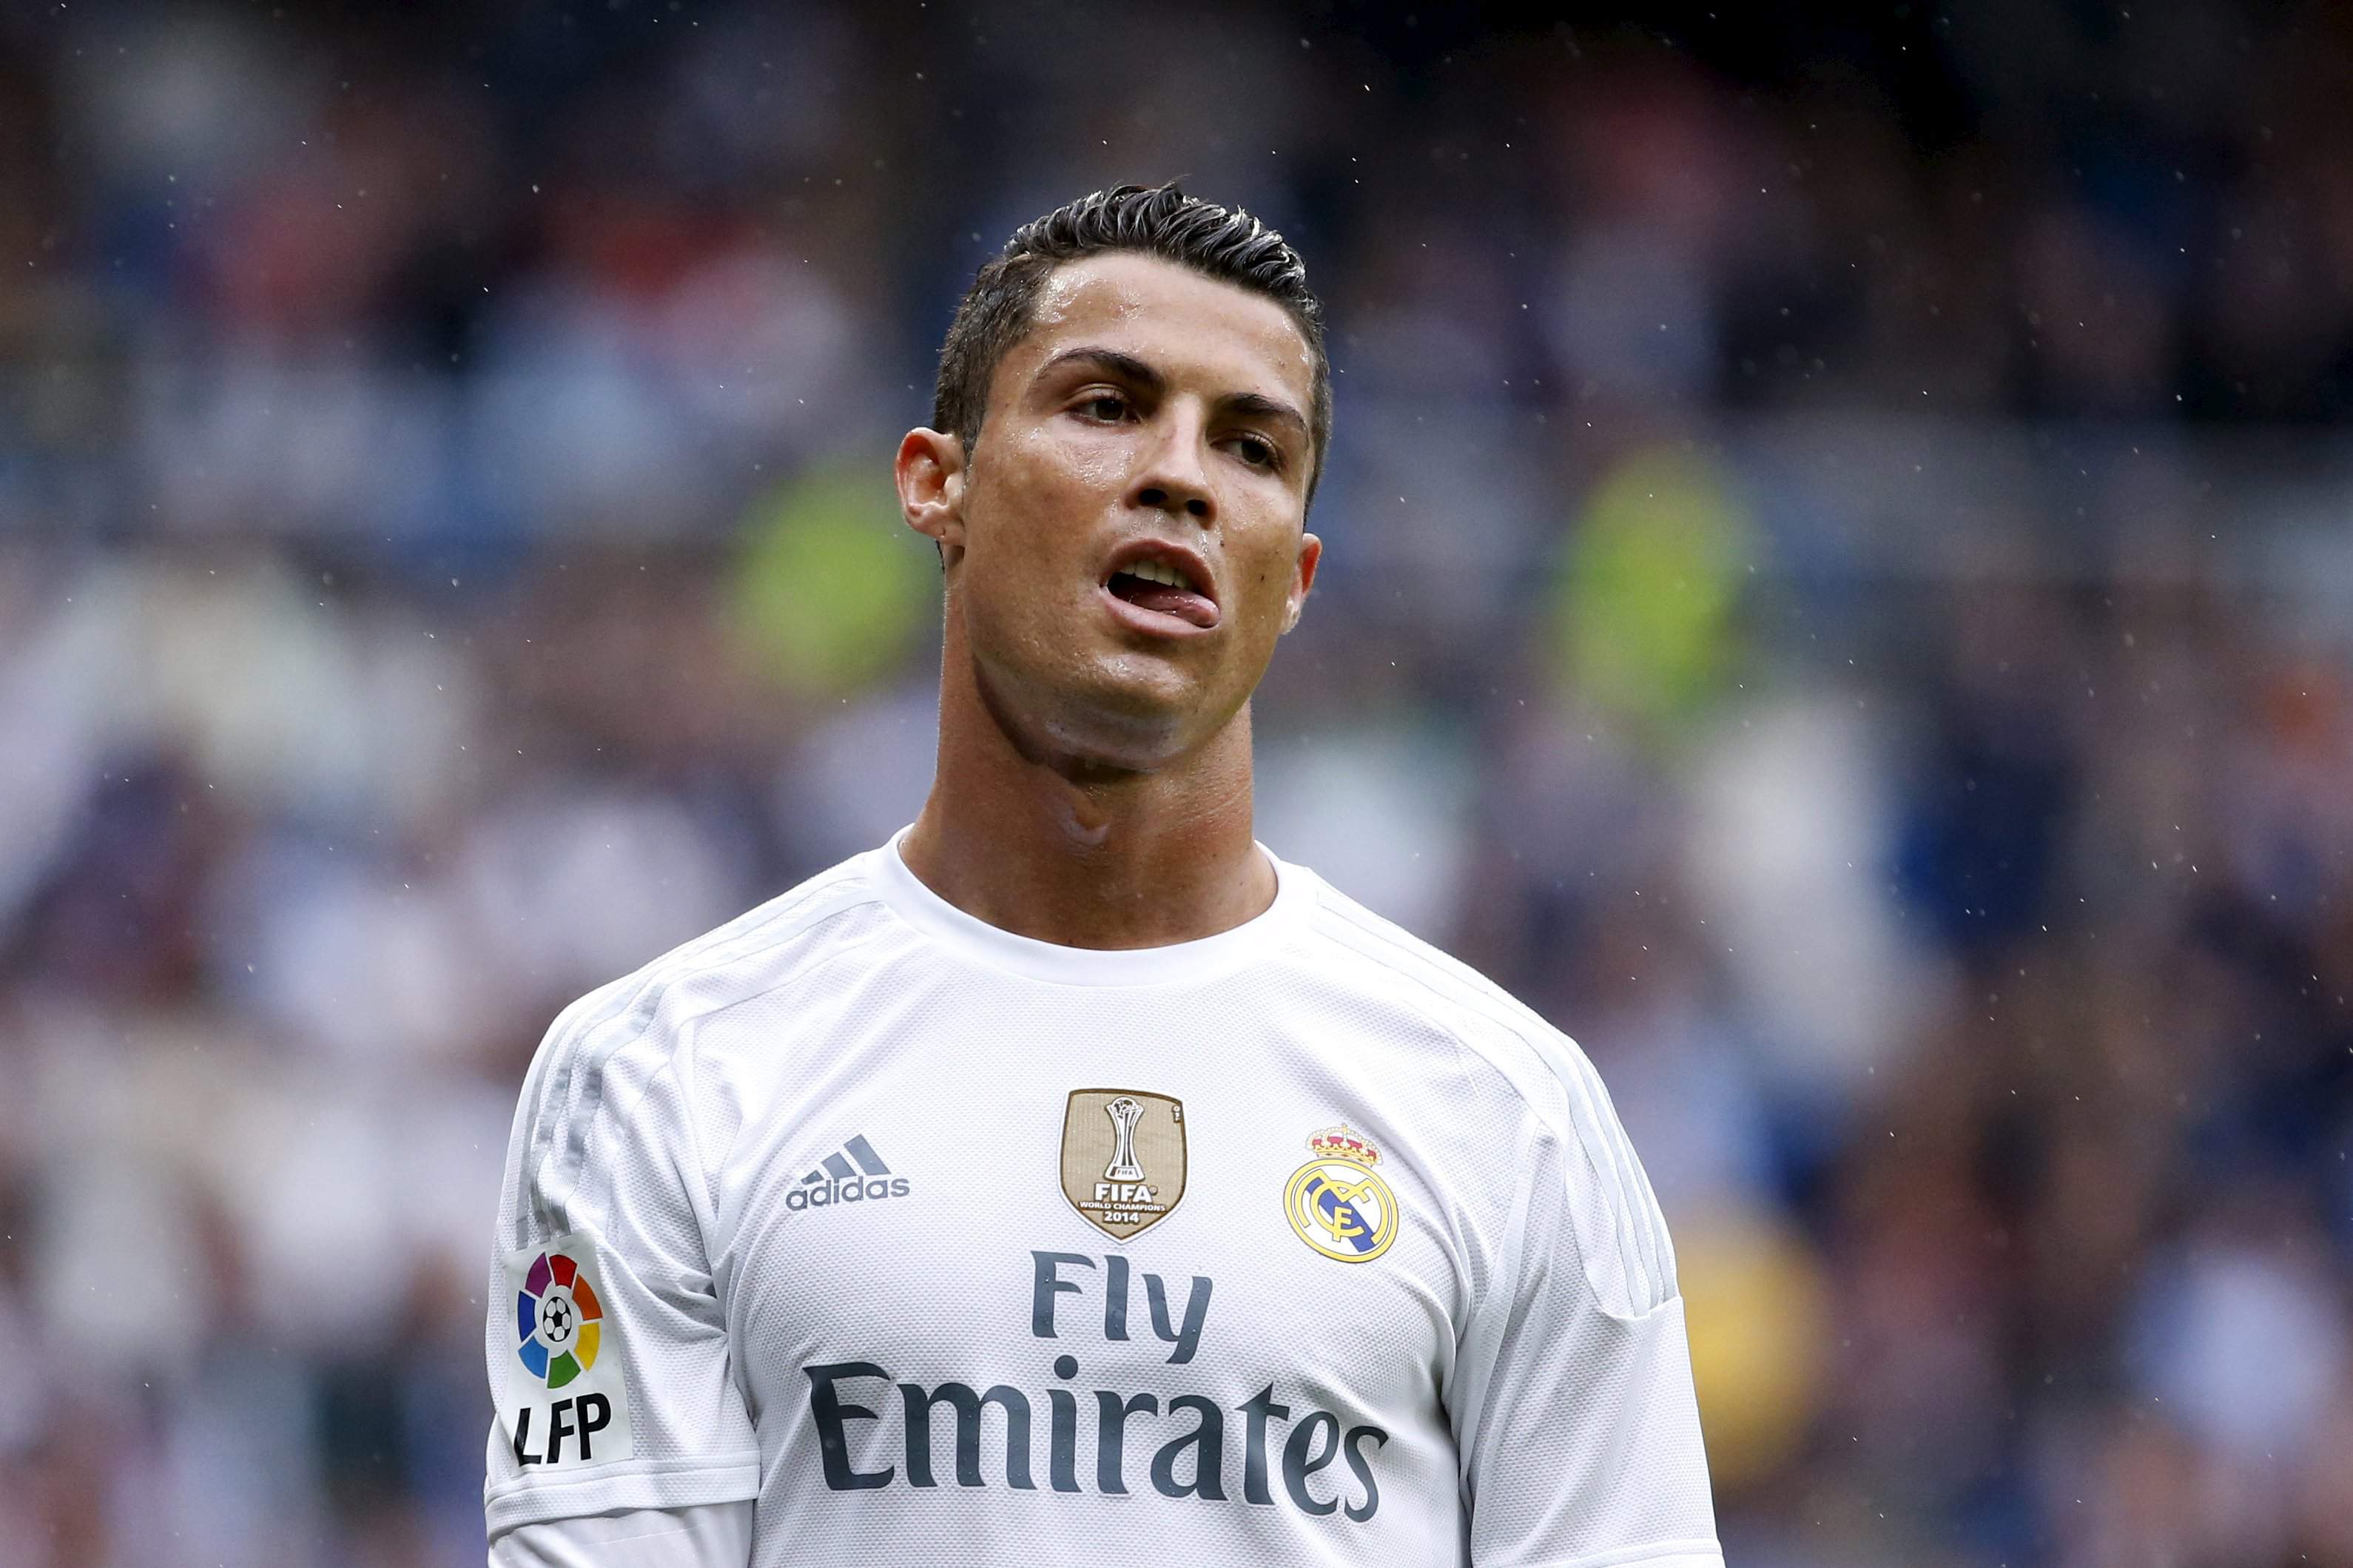 Real Madrid's Cristiano Ronaldo reacts during their Spanish First Division soccer match against Levante at Santiago Bernabeu stadium in Madrid, October 17, 2015. REUTERS/Juan Medina